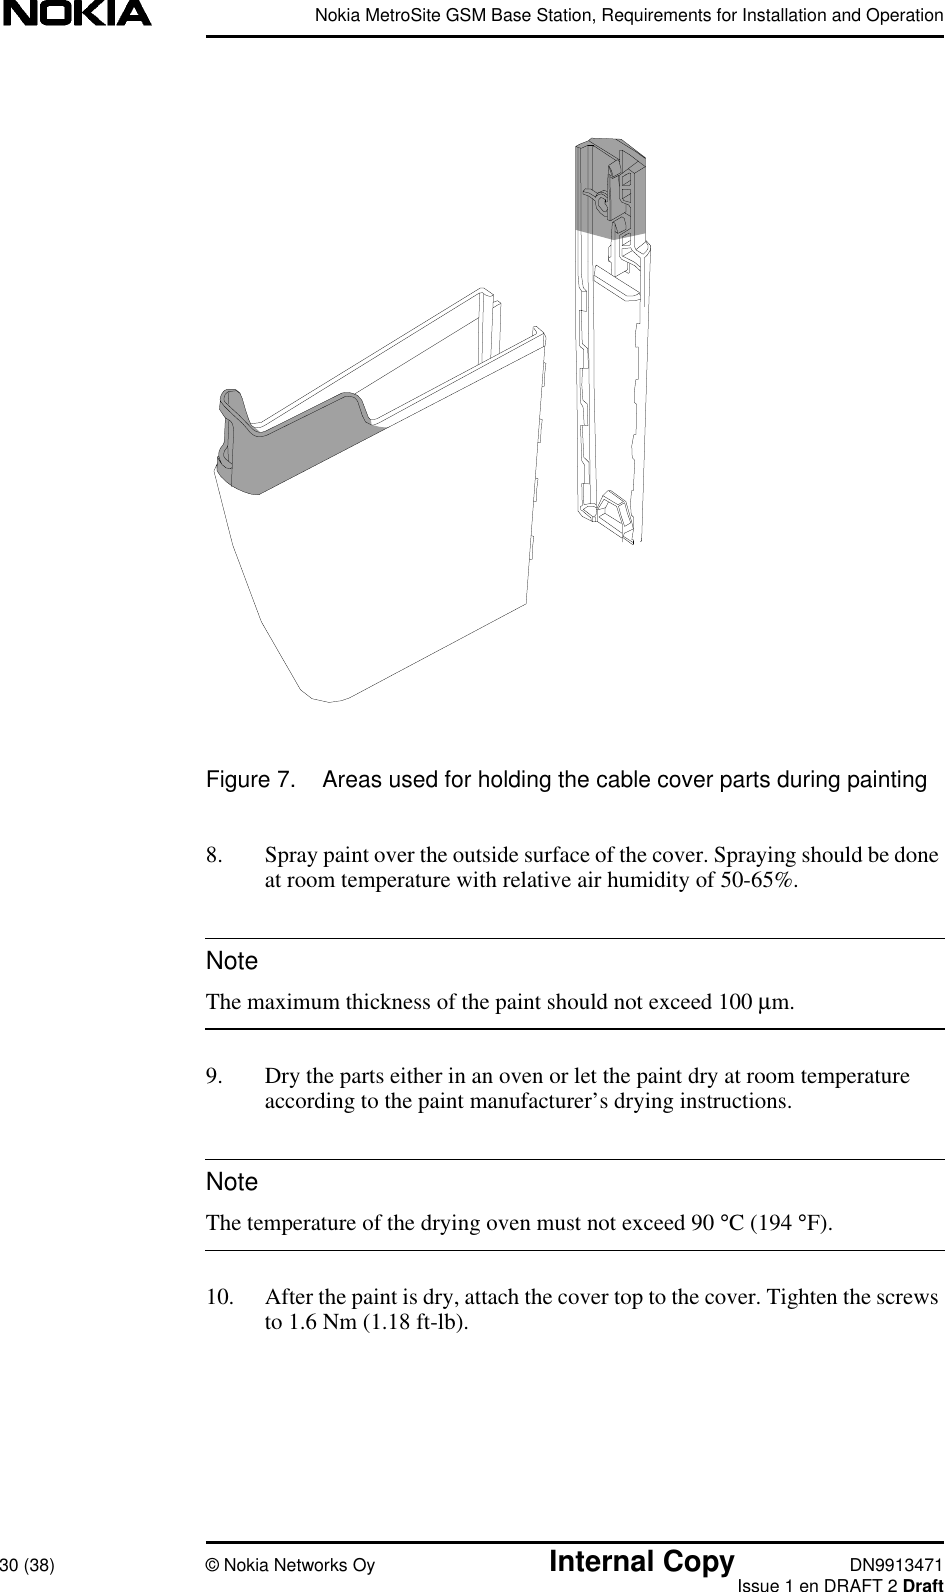 Nokia MetroSite GSM Base Station, Requirements for Installation and Operation30 (38) © Nokia Networks Oy Internal Copy DN9913471Issue 1 en DRAFT 2 DraftNoteNoteFigure 7. Areas used for holding the cable cover parts during painting8. Spray paint over the outside surface of the cover. Spraying should be doneat room temperature with relative air humidity of 50-65%.The maximum thickness of the paint should not exceed 100 µm.9. Dry the parts either in an oven or let the paint dry at room temperatureaccording to the paint manufacturer’s drying instructions.The temperature of the drying oven must not exceed 90 °C (194 °F).10. After the paint is dry, attach the cover top to the cover. Tighten the screwsto 1.6 Nm (1.18 ft-lb).